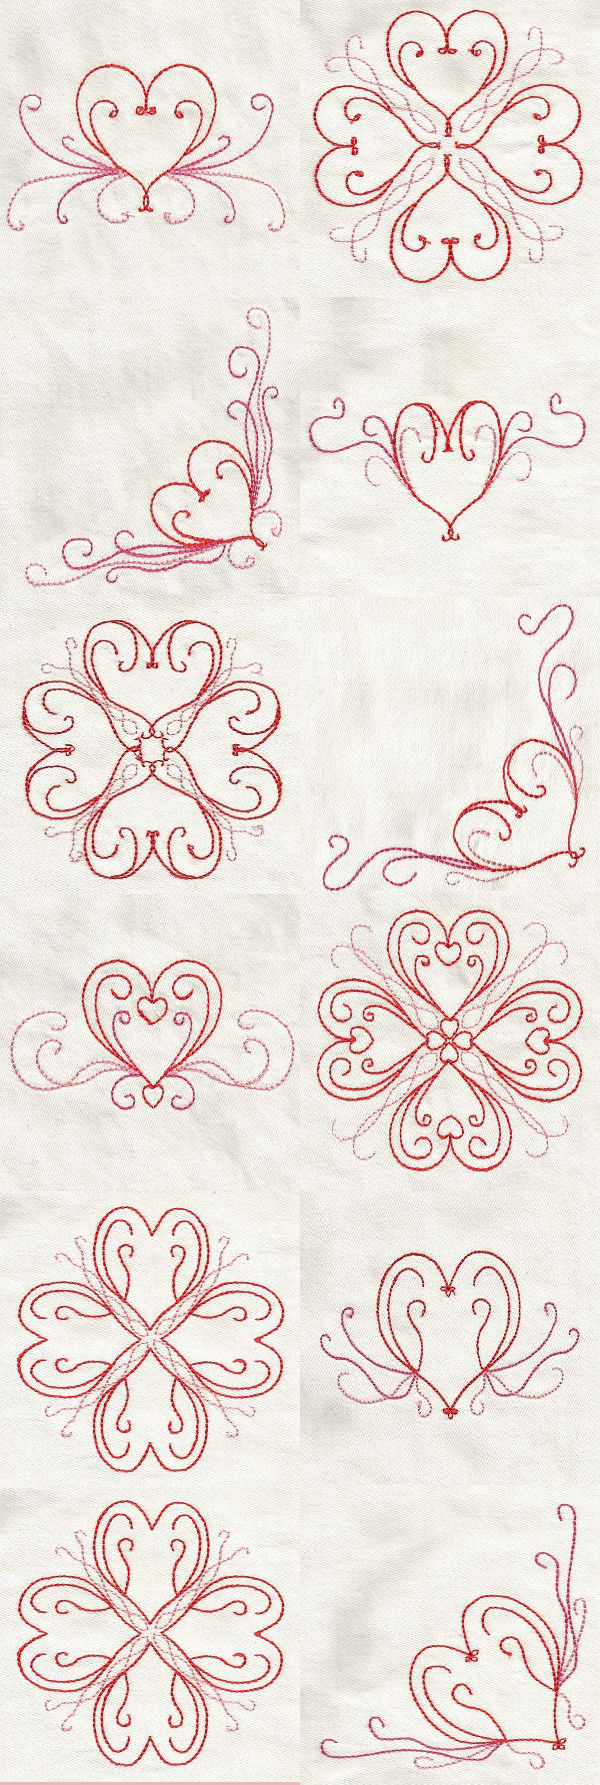 Heart Borders Embroidery Machine Design Details